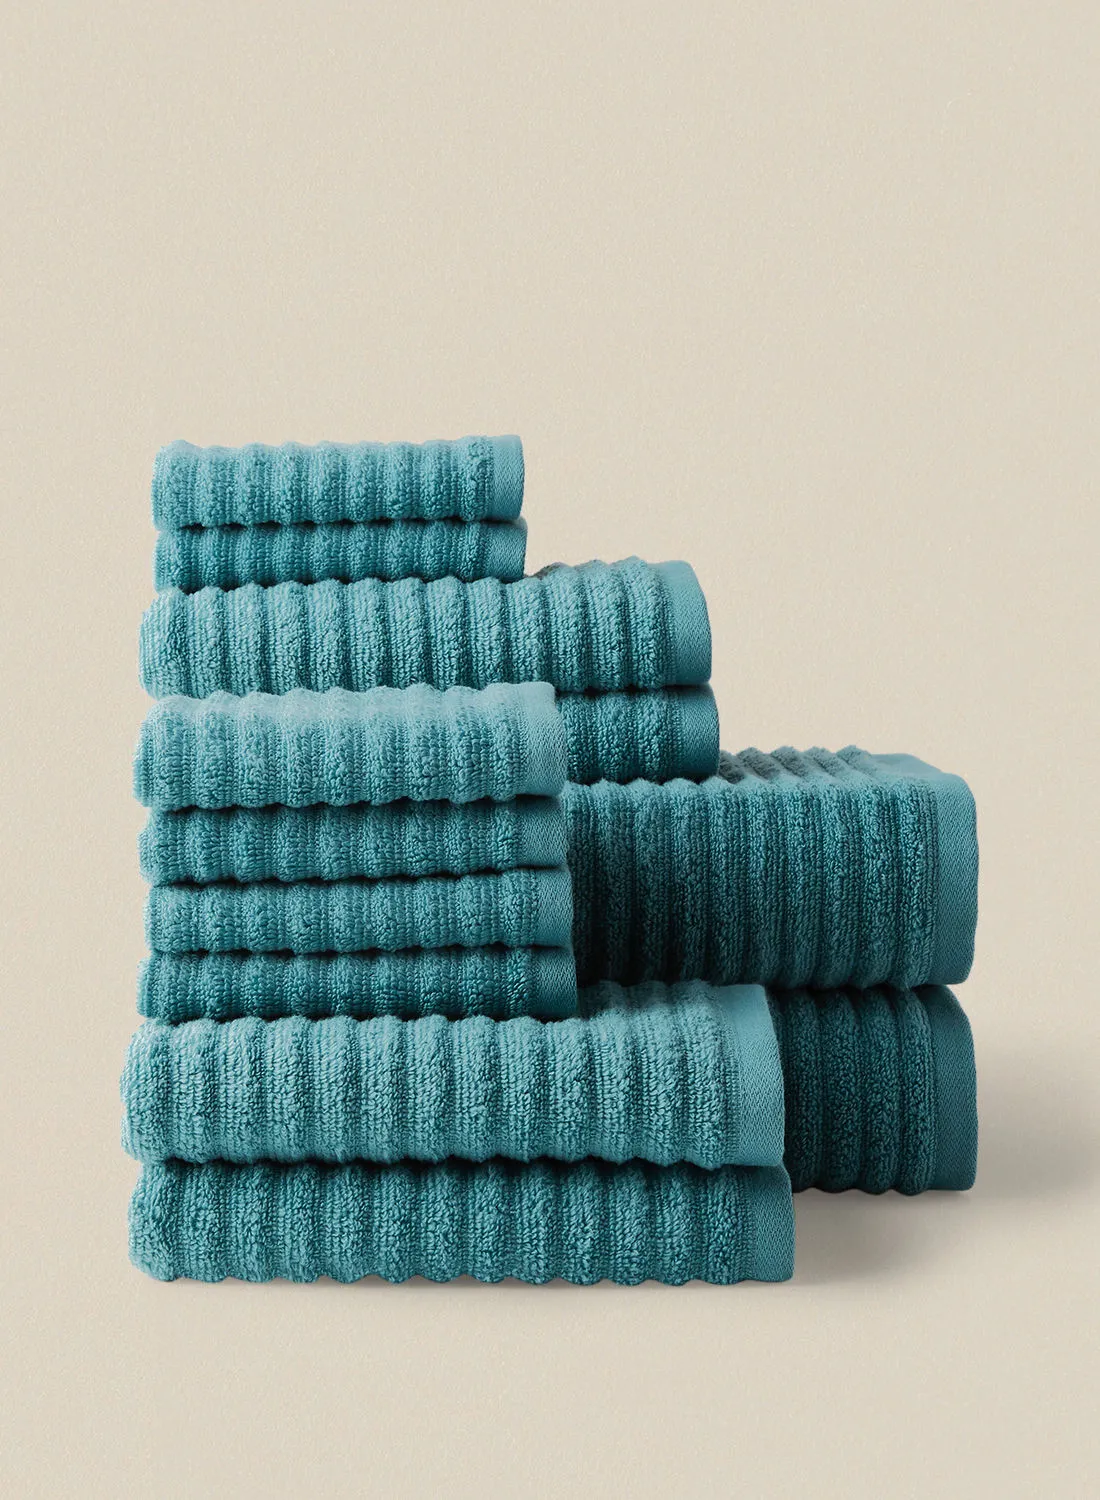 noon east 12 Piece Bathroom Towel Set - 450 GSM 100% Cotton Ribbed - 4 Hand Towel - 6 Face Towel - 2 Bath Towel - Blue Color - Highly Absorbent - Fast Dry